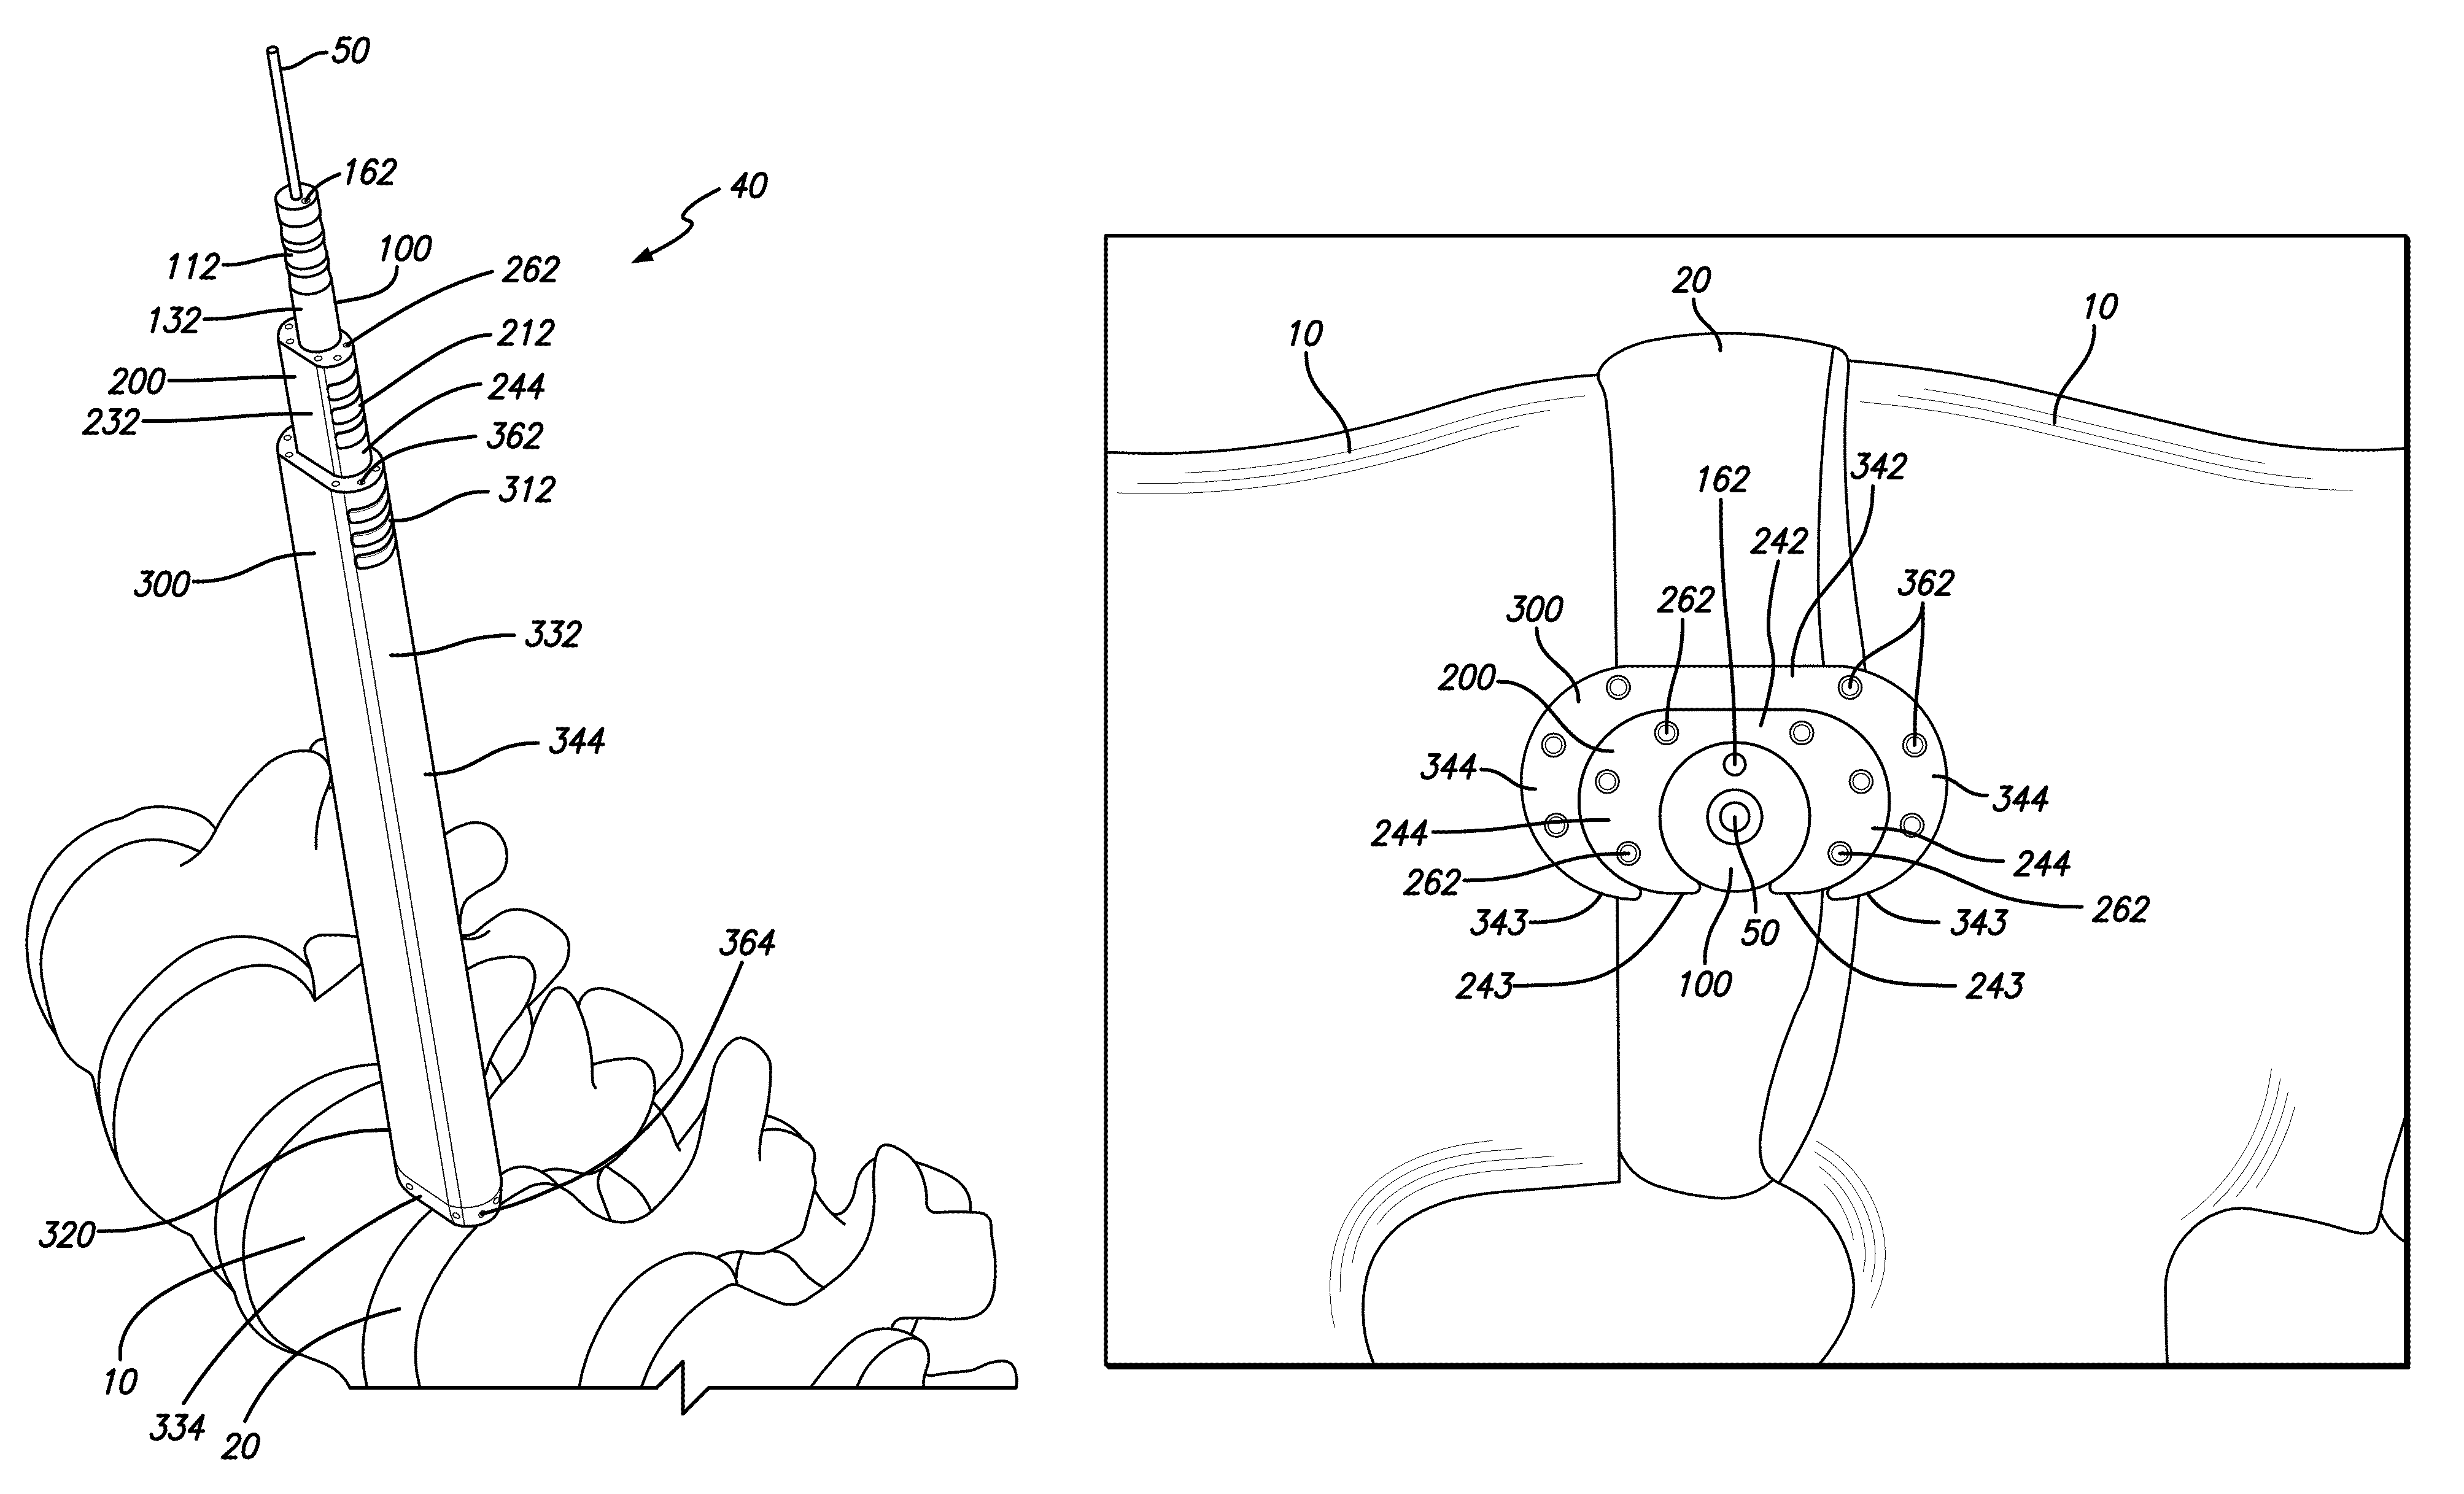 Tissue dilator and retractor system and method of use